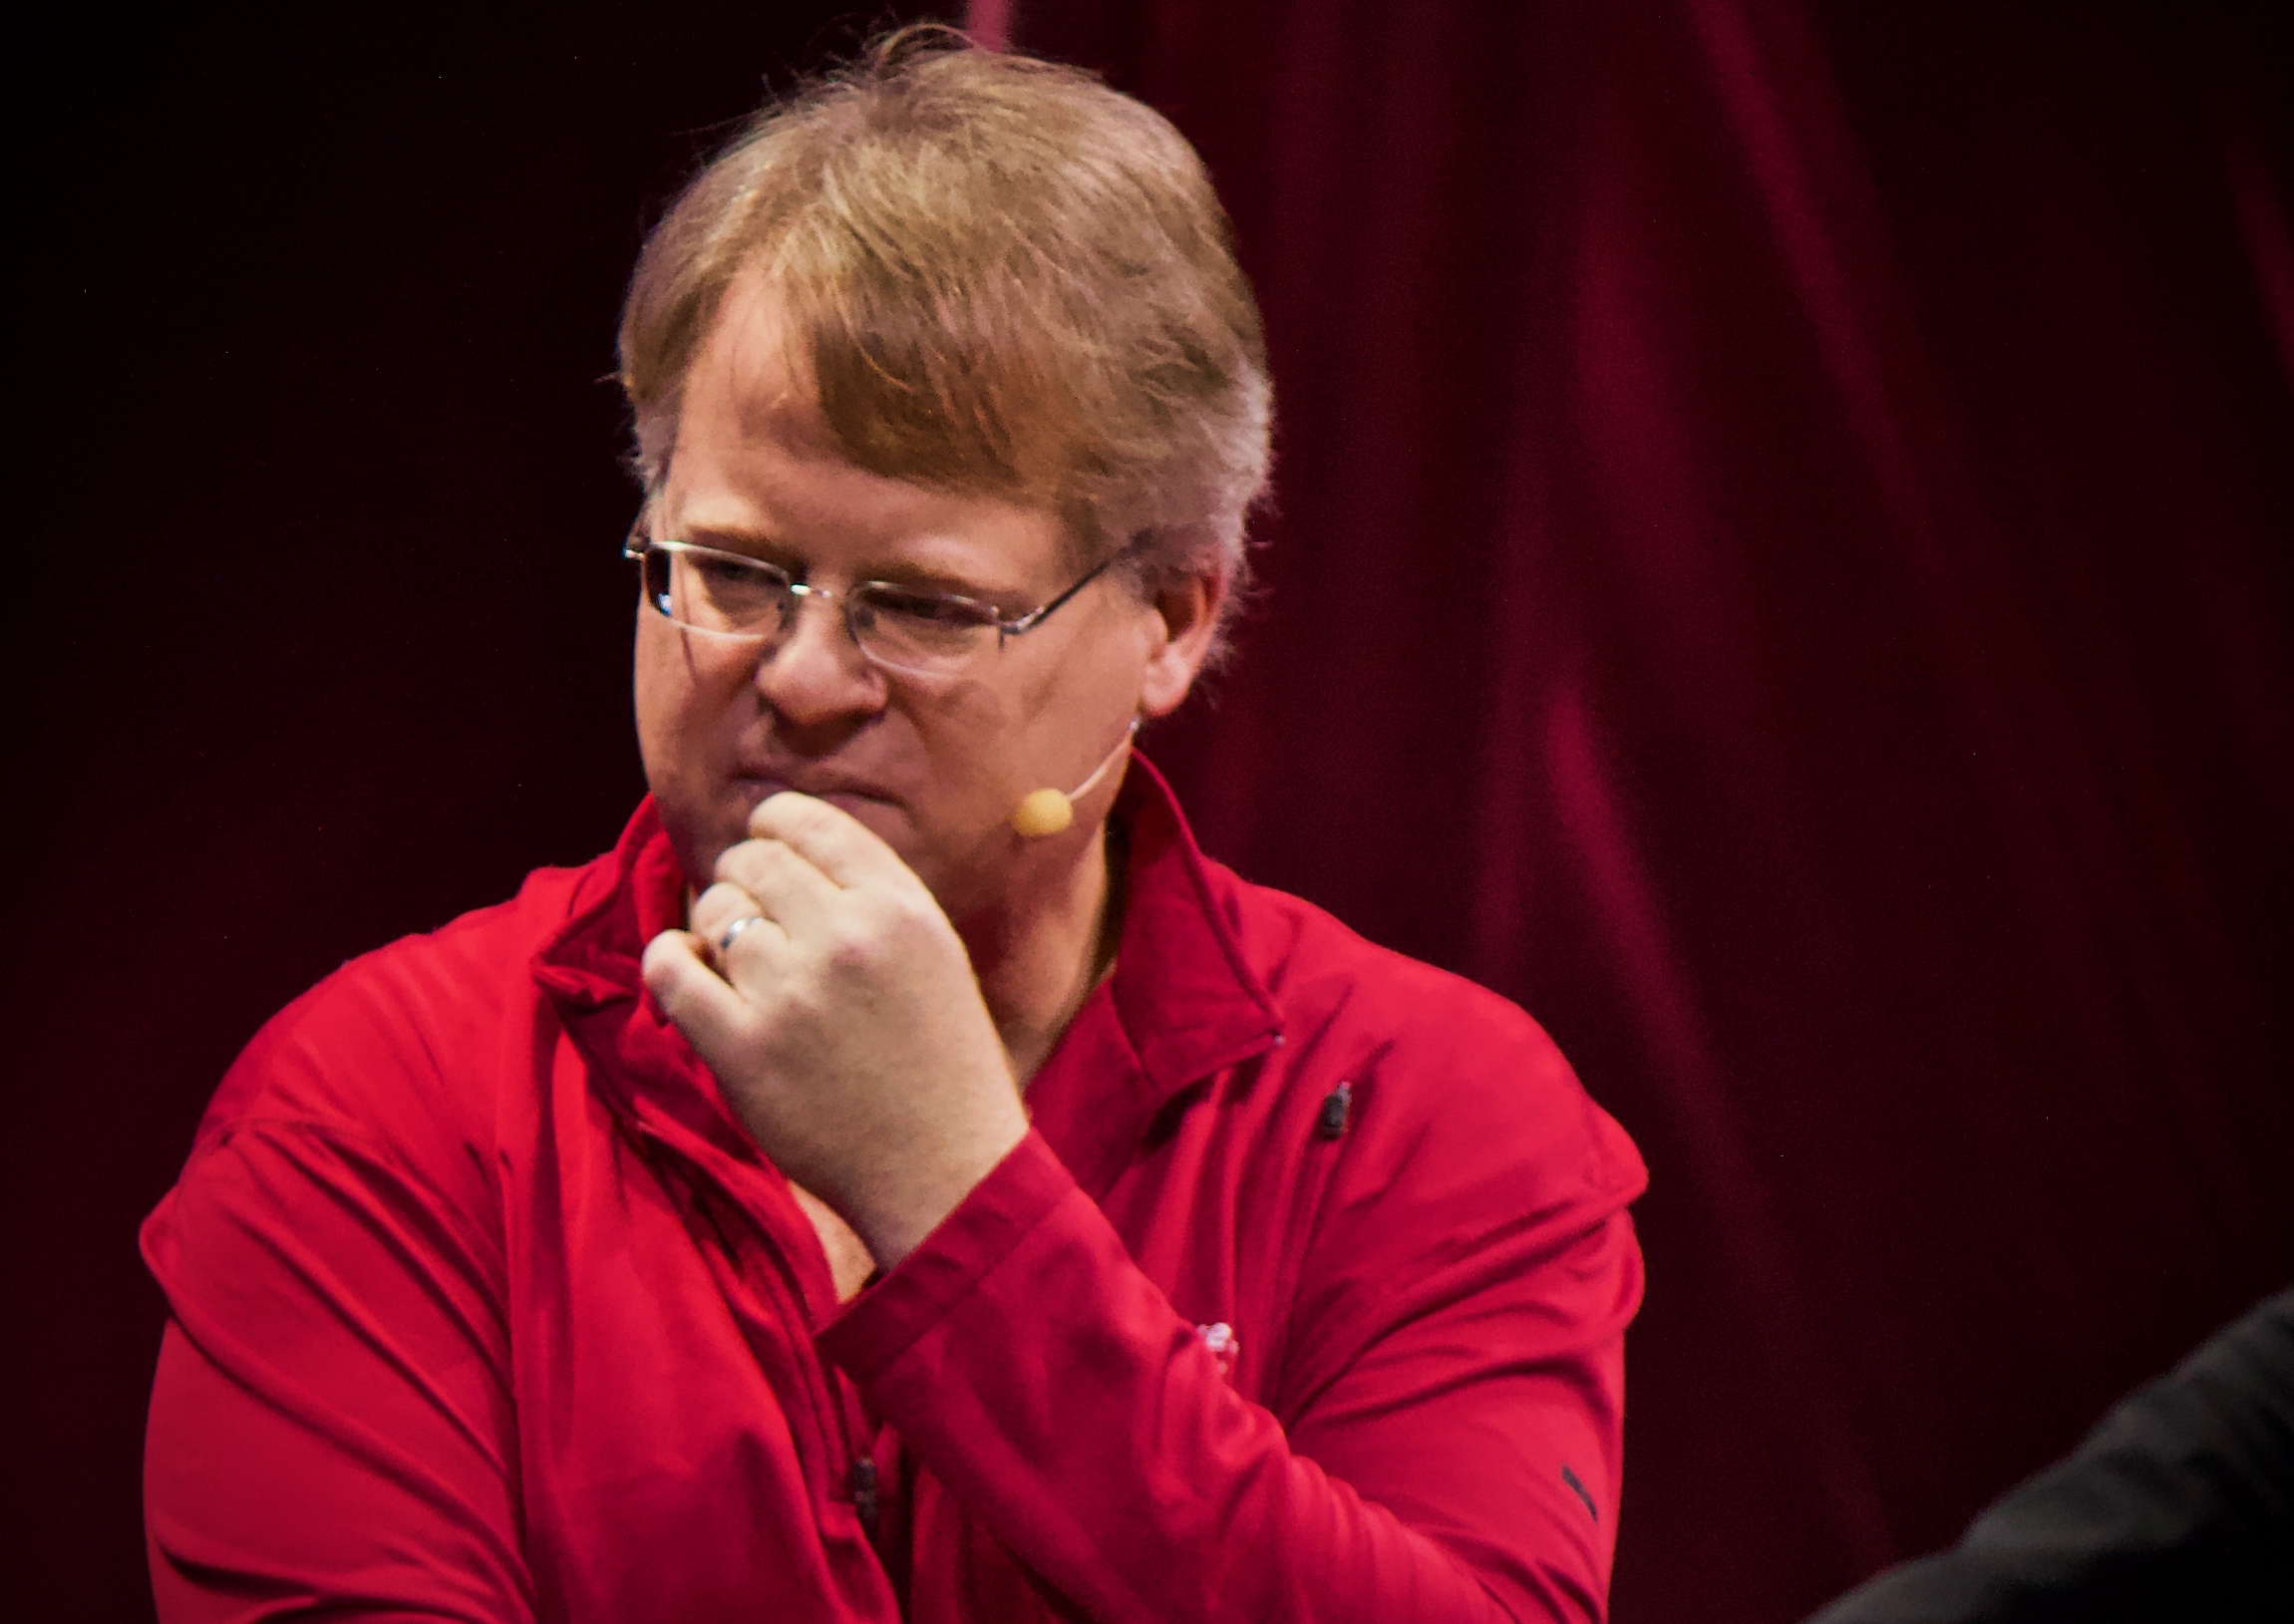 Scoble: an utterly tone deaf response to harassment allegations